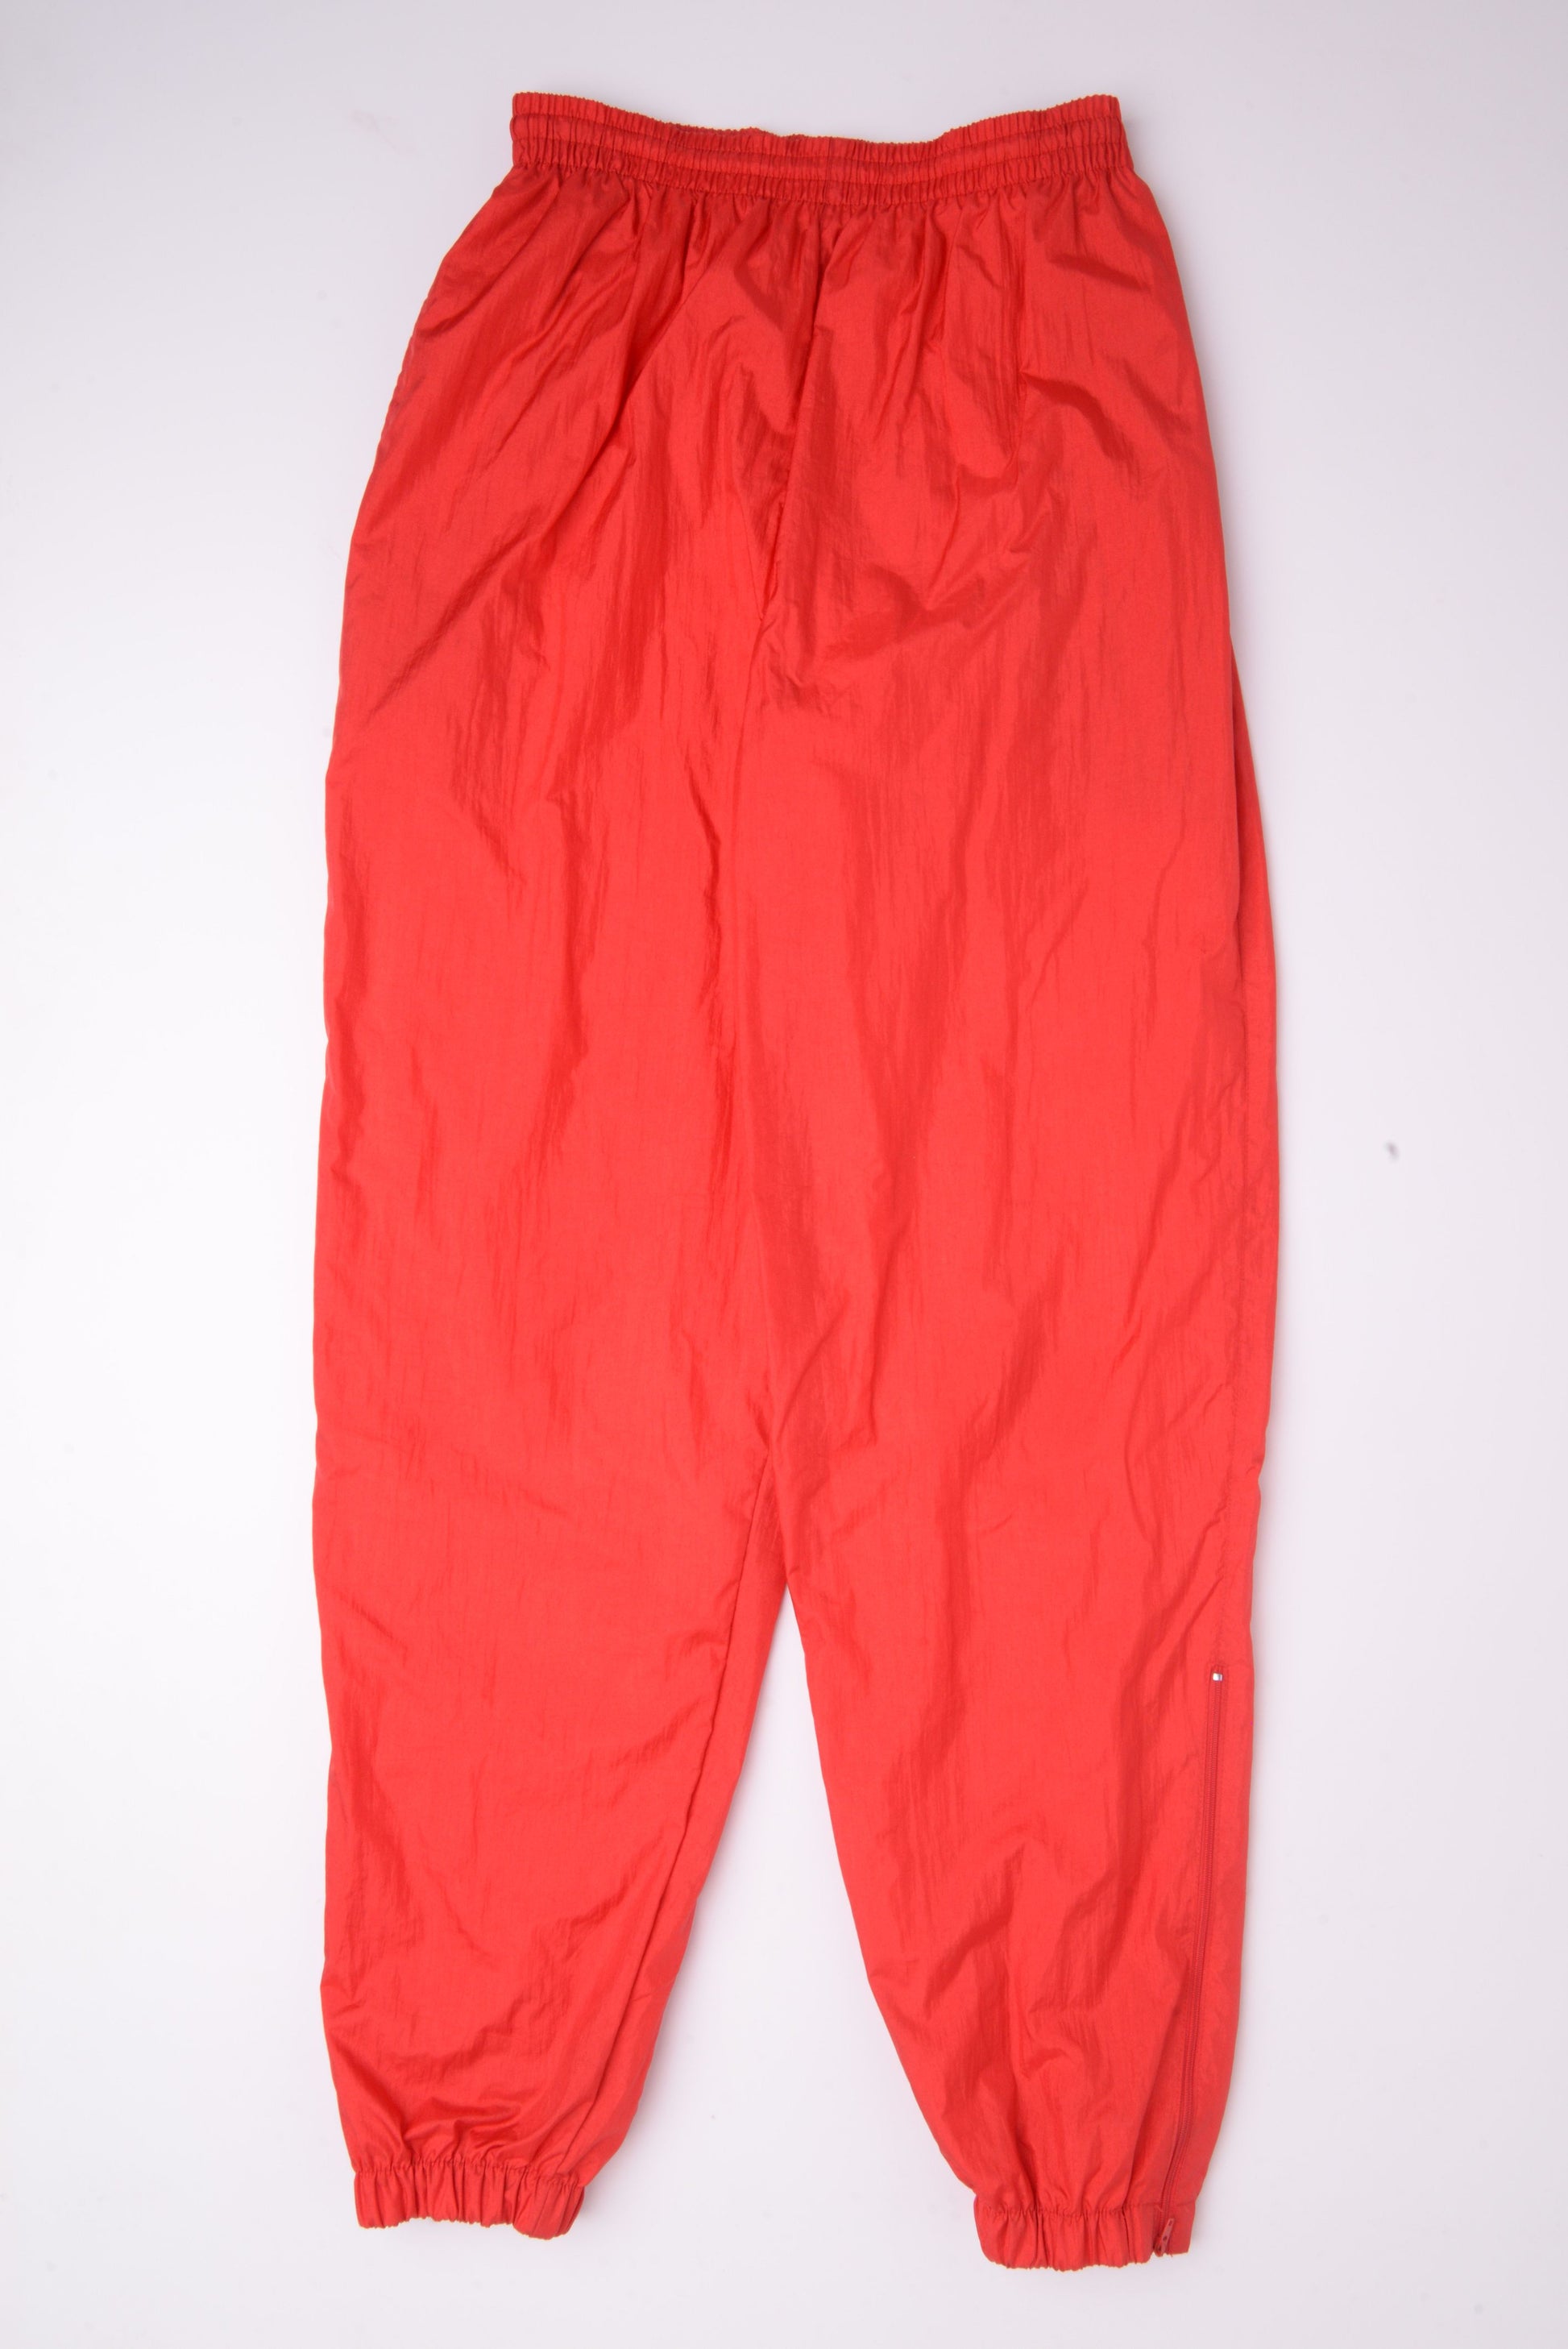 Red Track Pants Free Shipping - The Vintage Twin